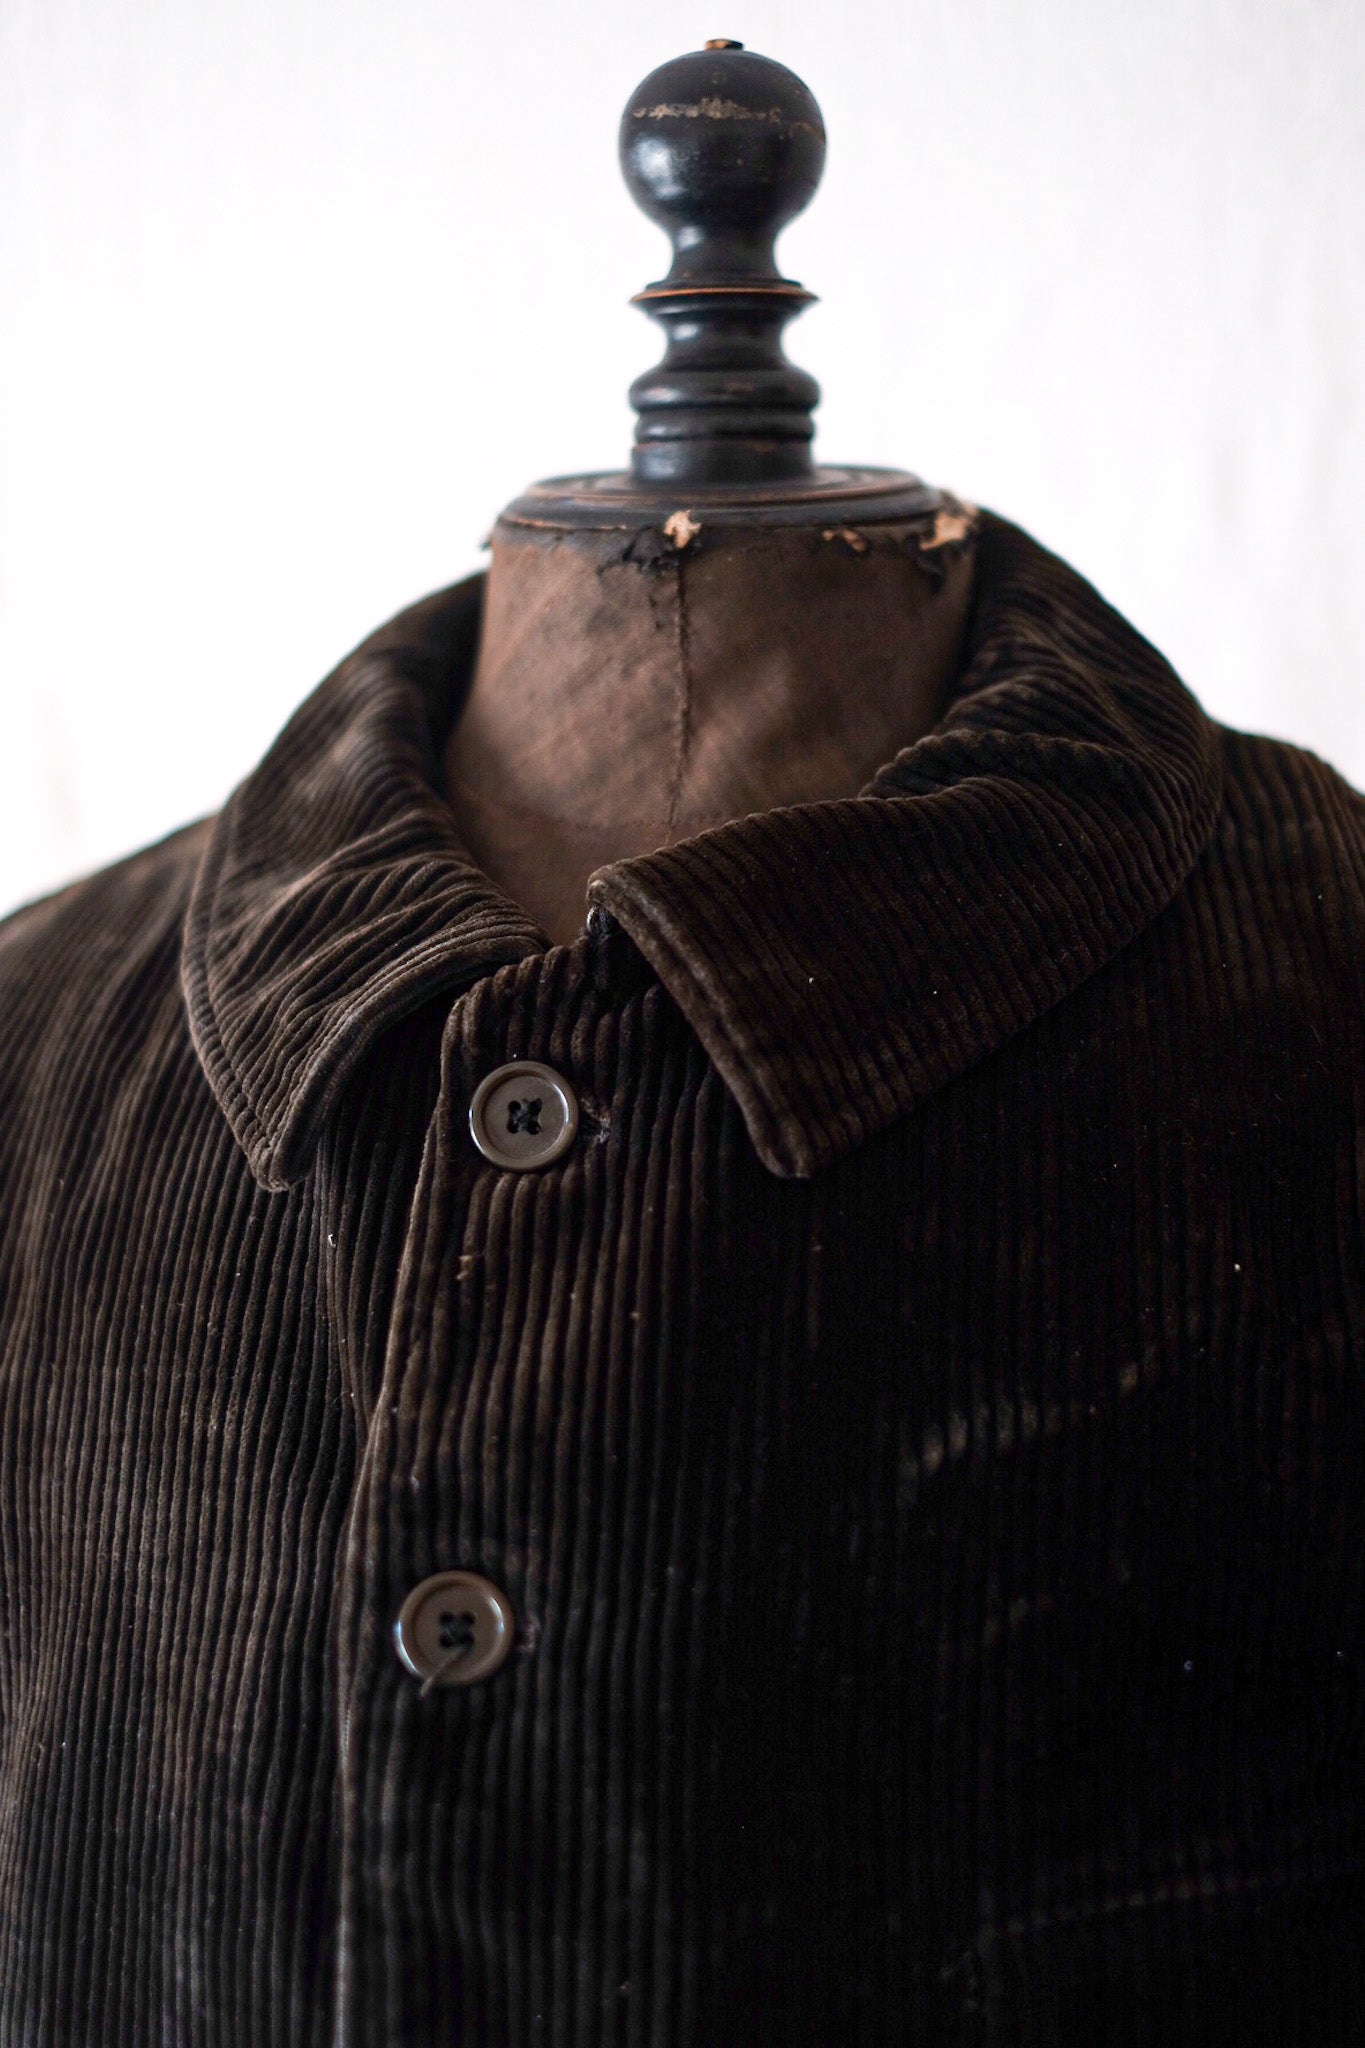 【~30's】French Vintage Dark Brown Corduroy Work Jacket "Adolphe Lafont" "Dead Stock"